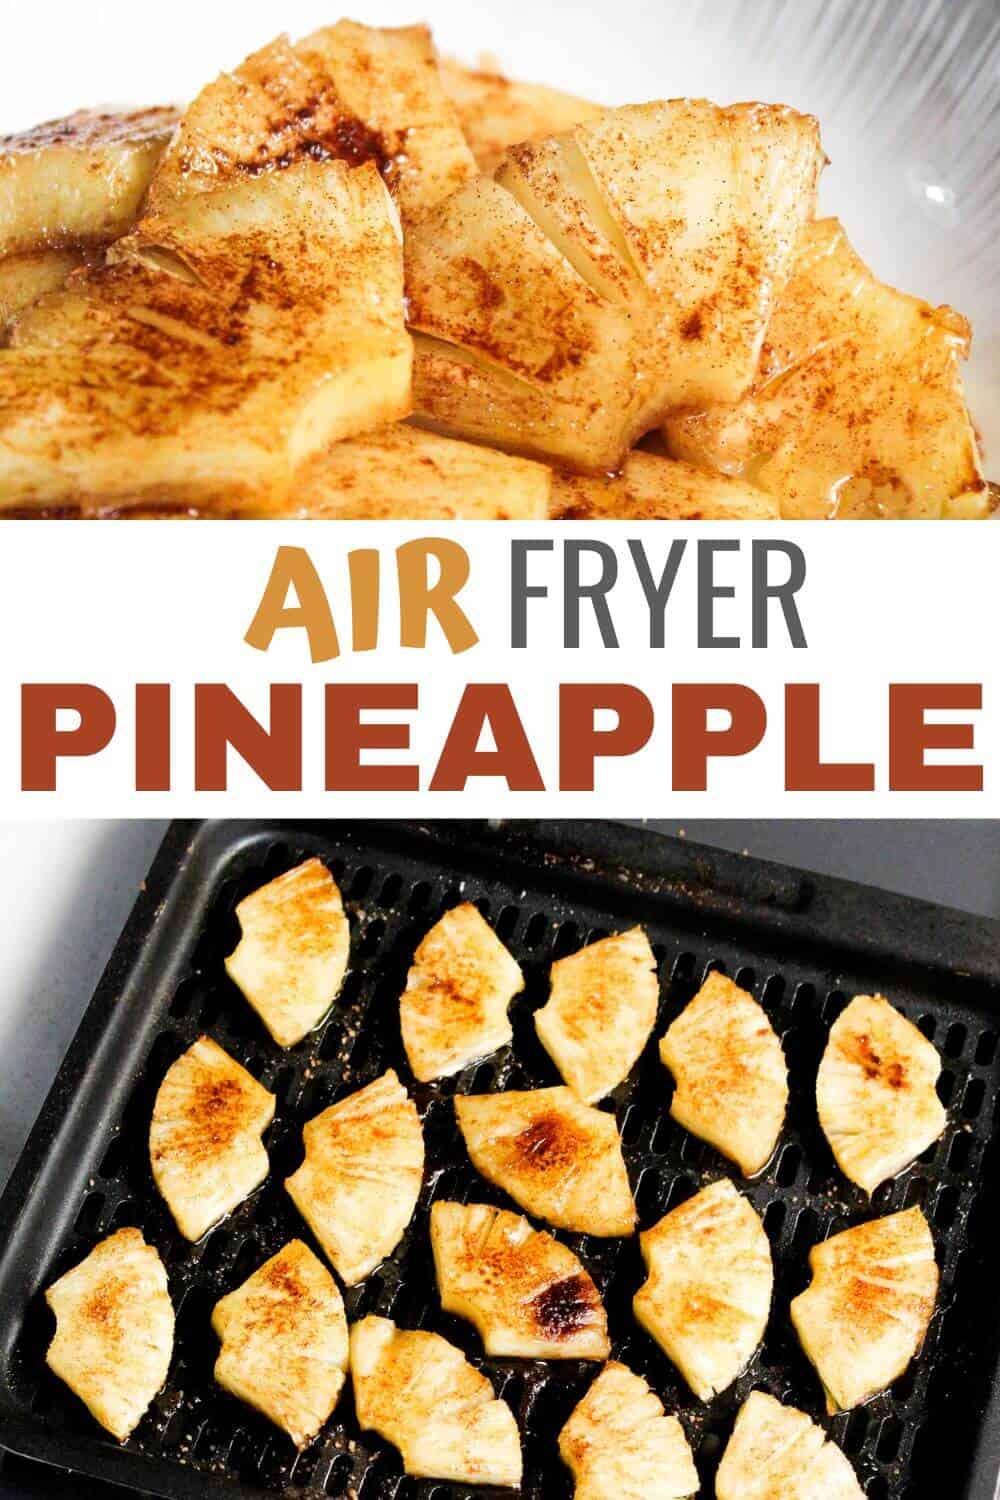 Air fryer pineapple with the text air fryer pineapple.